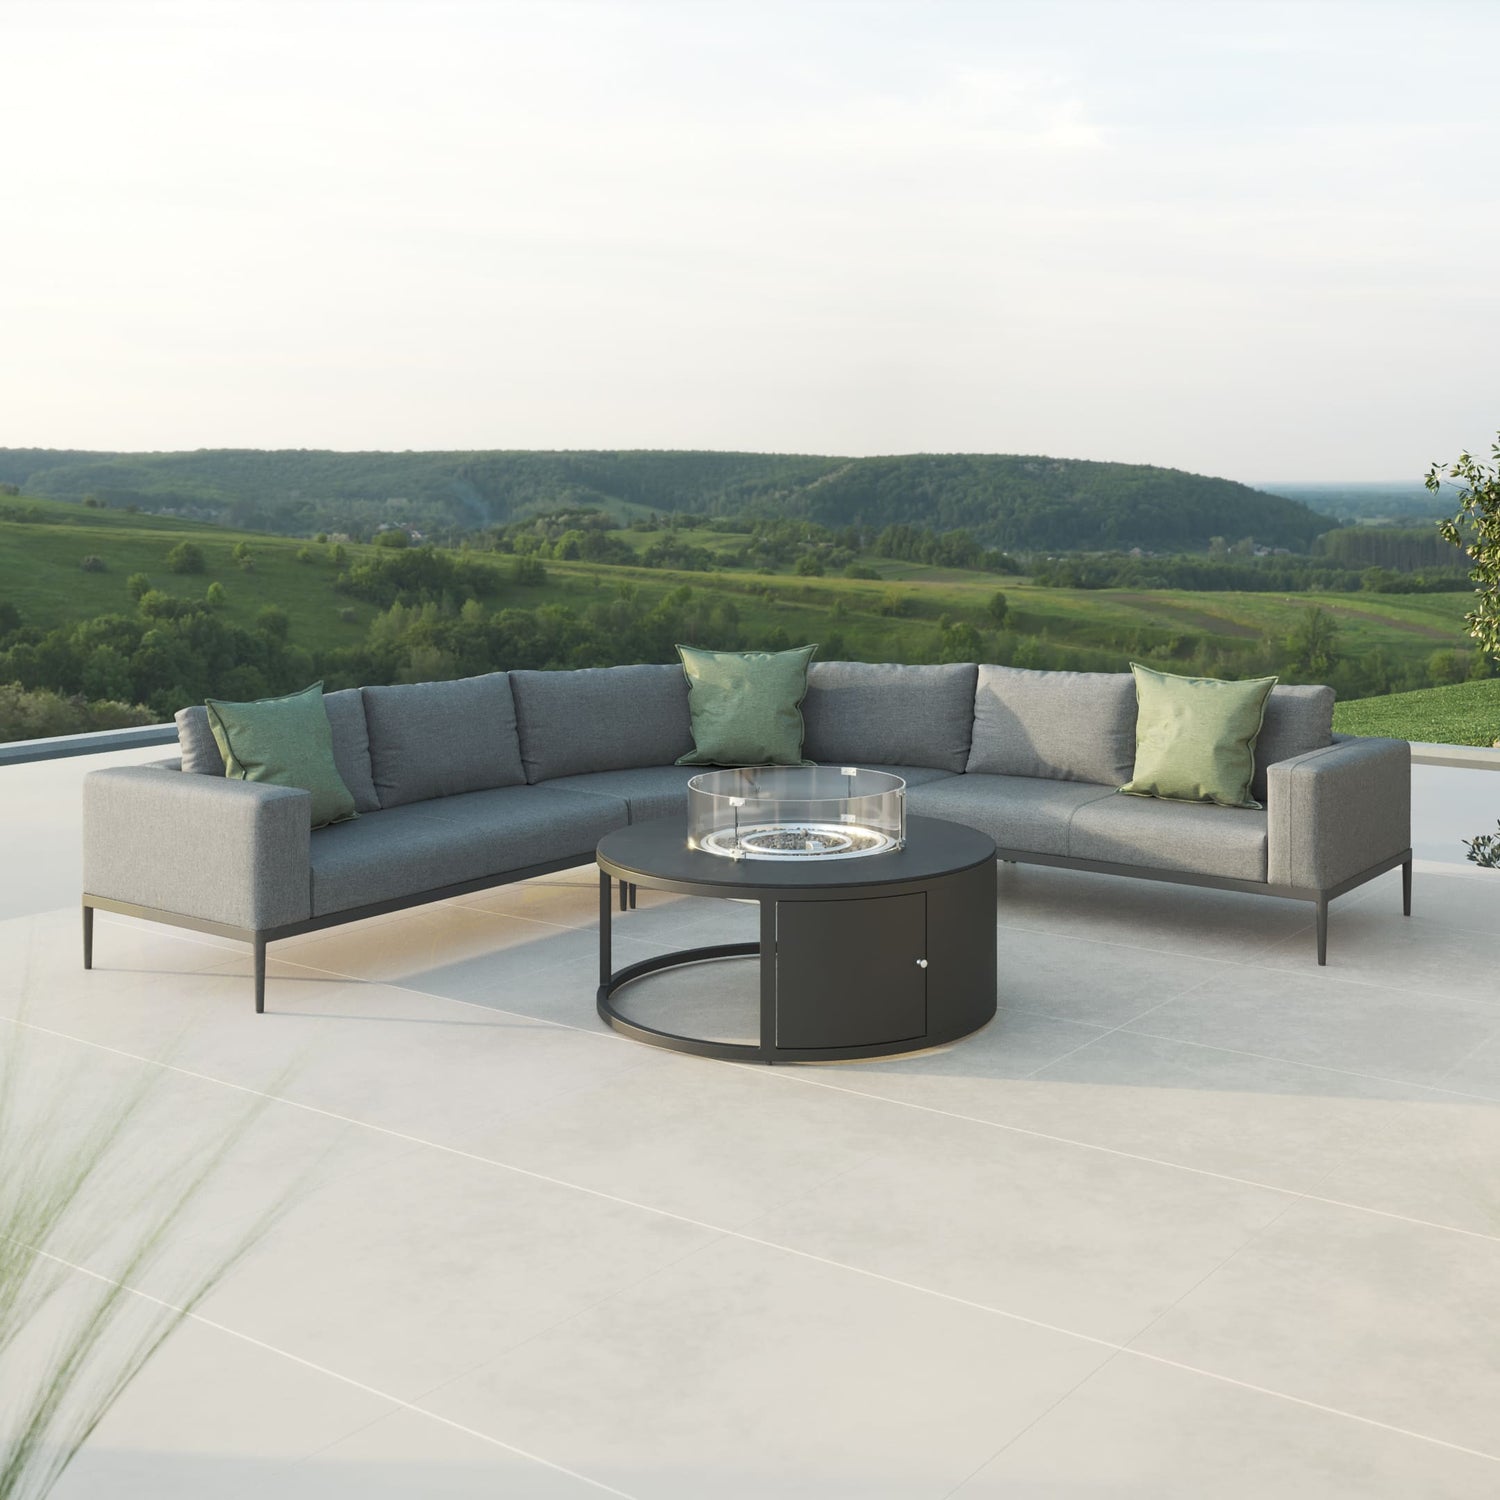 Maze Eve Grande Corner Sofa Group With Round Fire Pit Coffee Table Flanelle From Another View With Fire Pit-Better Bed Company